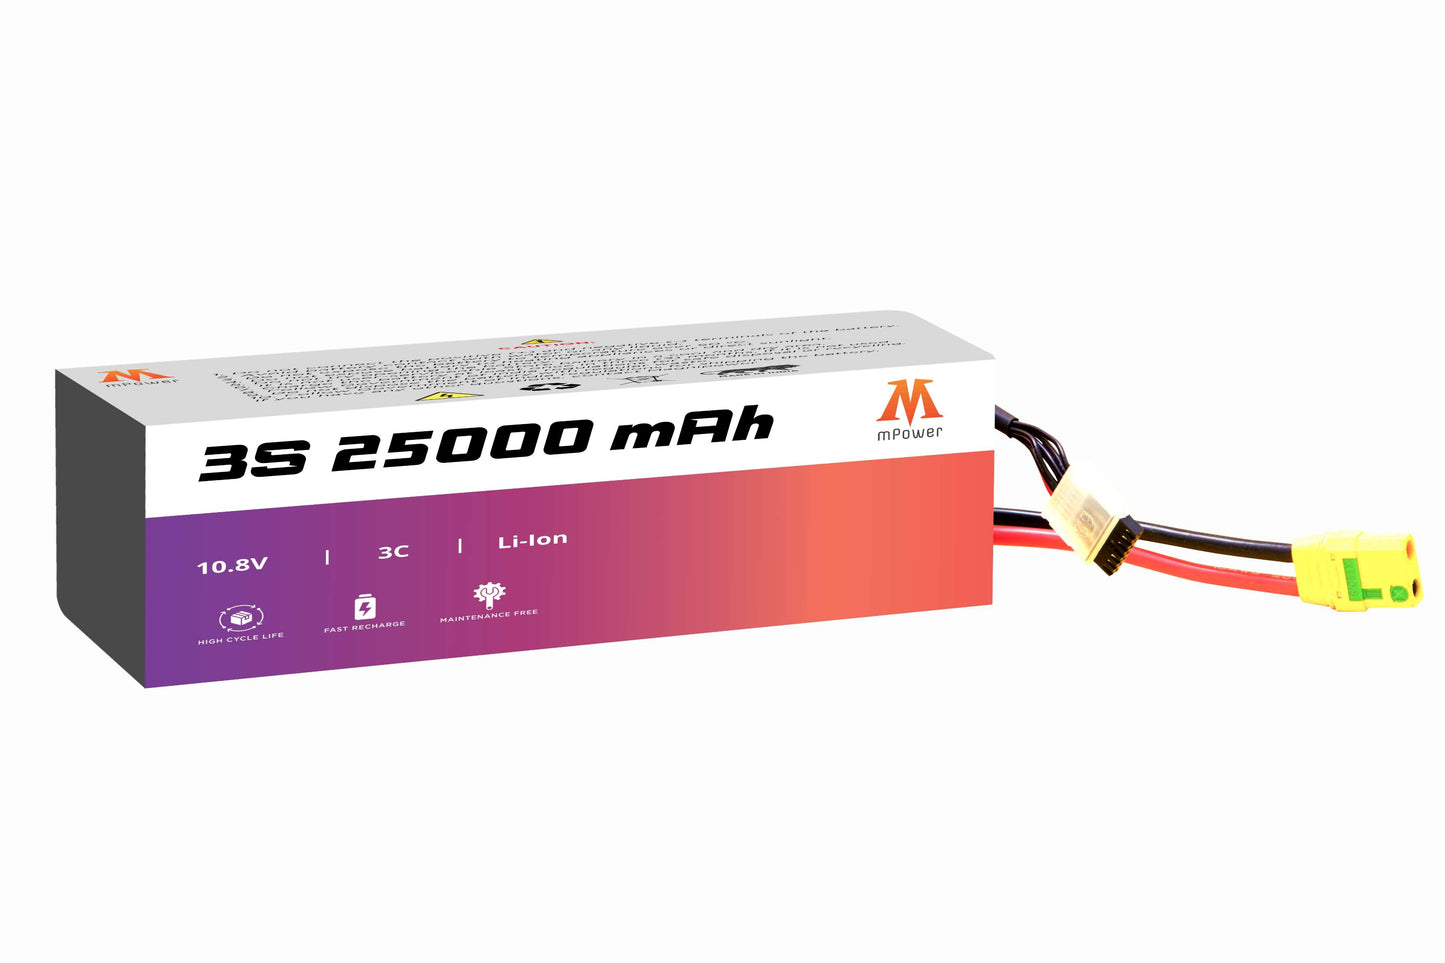 mPower 3S 25000mAh Lithium-Ion Battery for Survey Drones